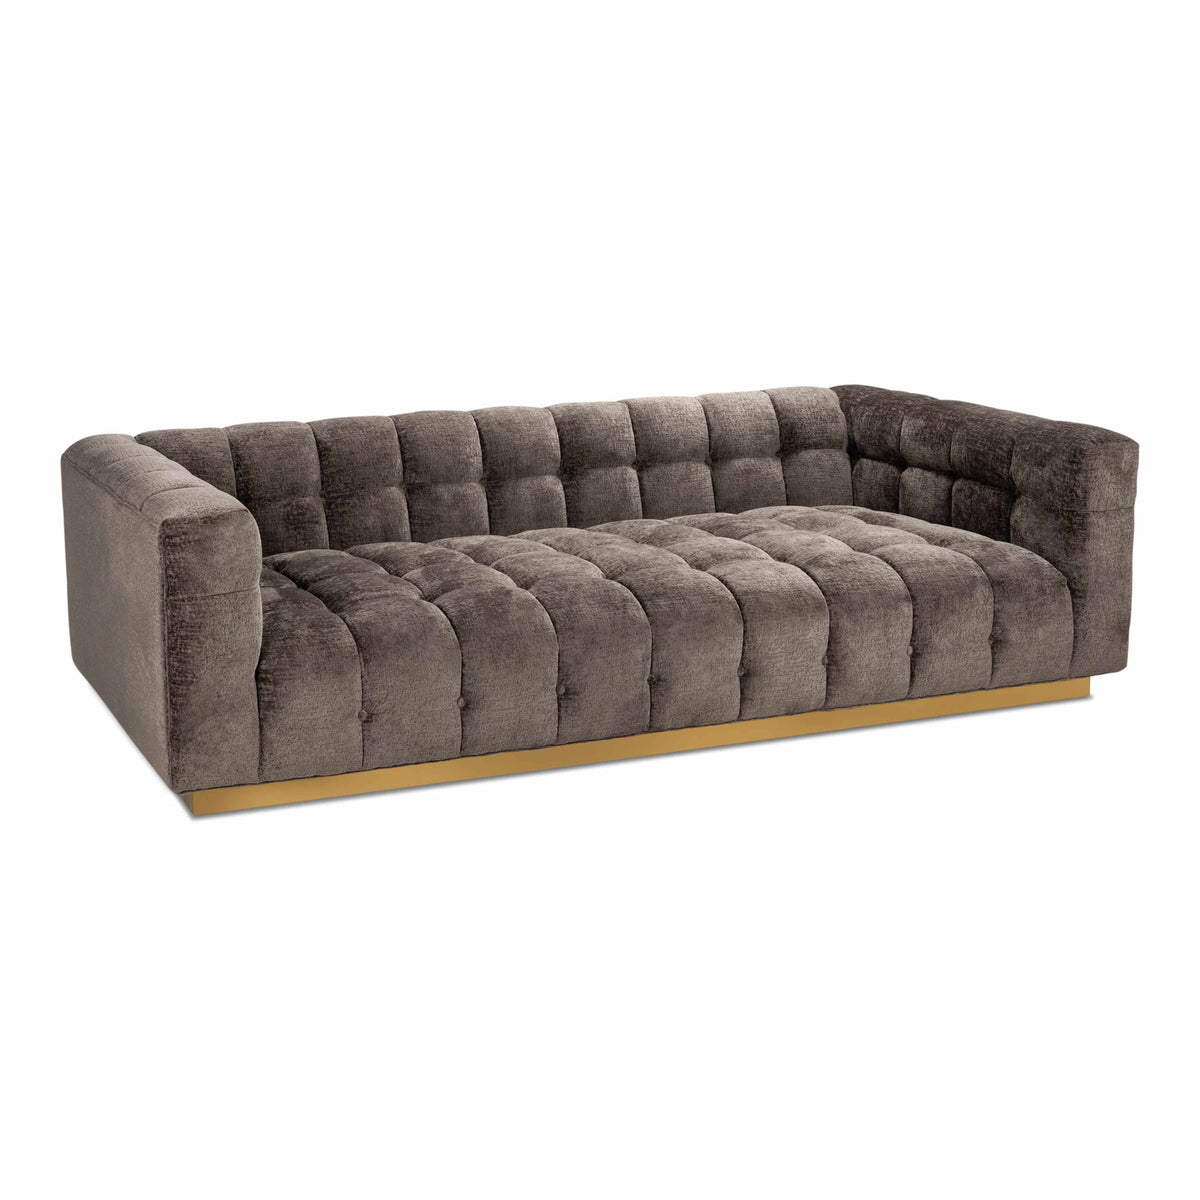 Extra Deep Delano Sofa in Hammered Velour